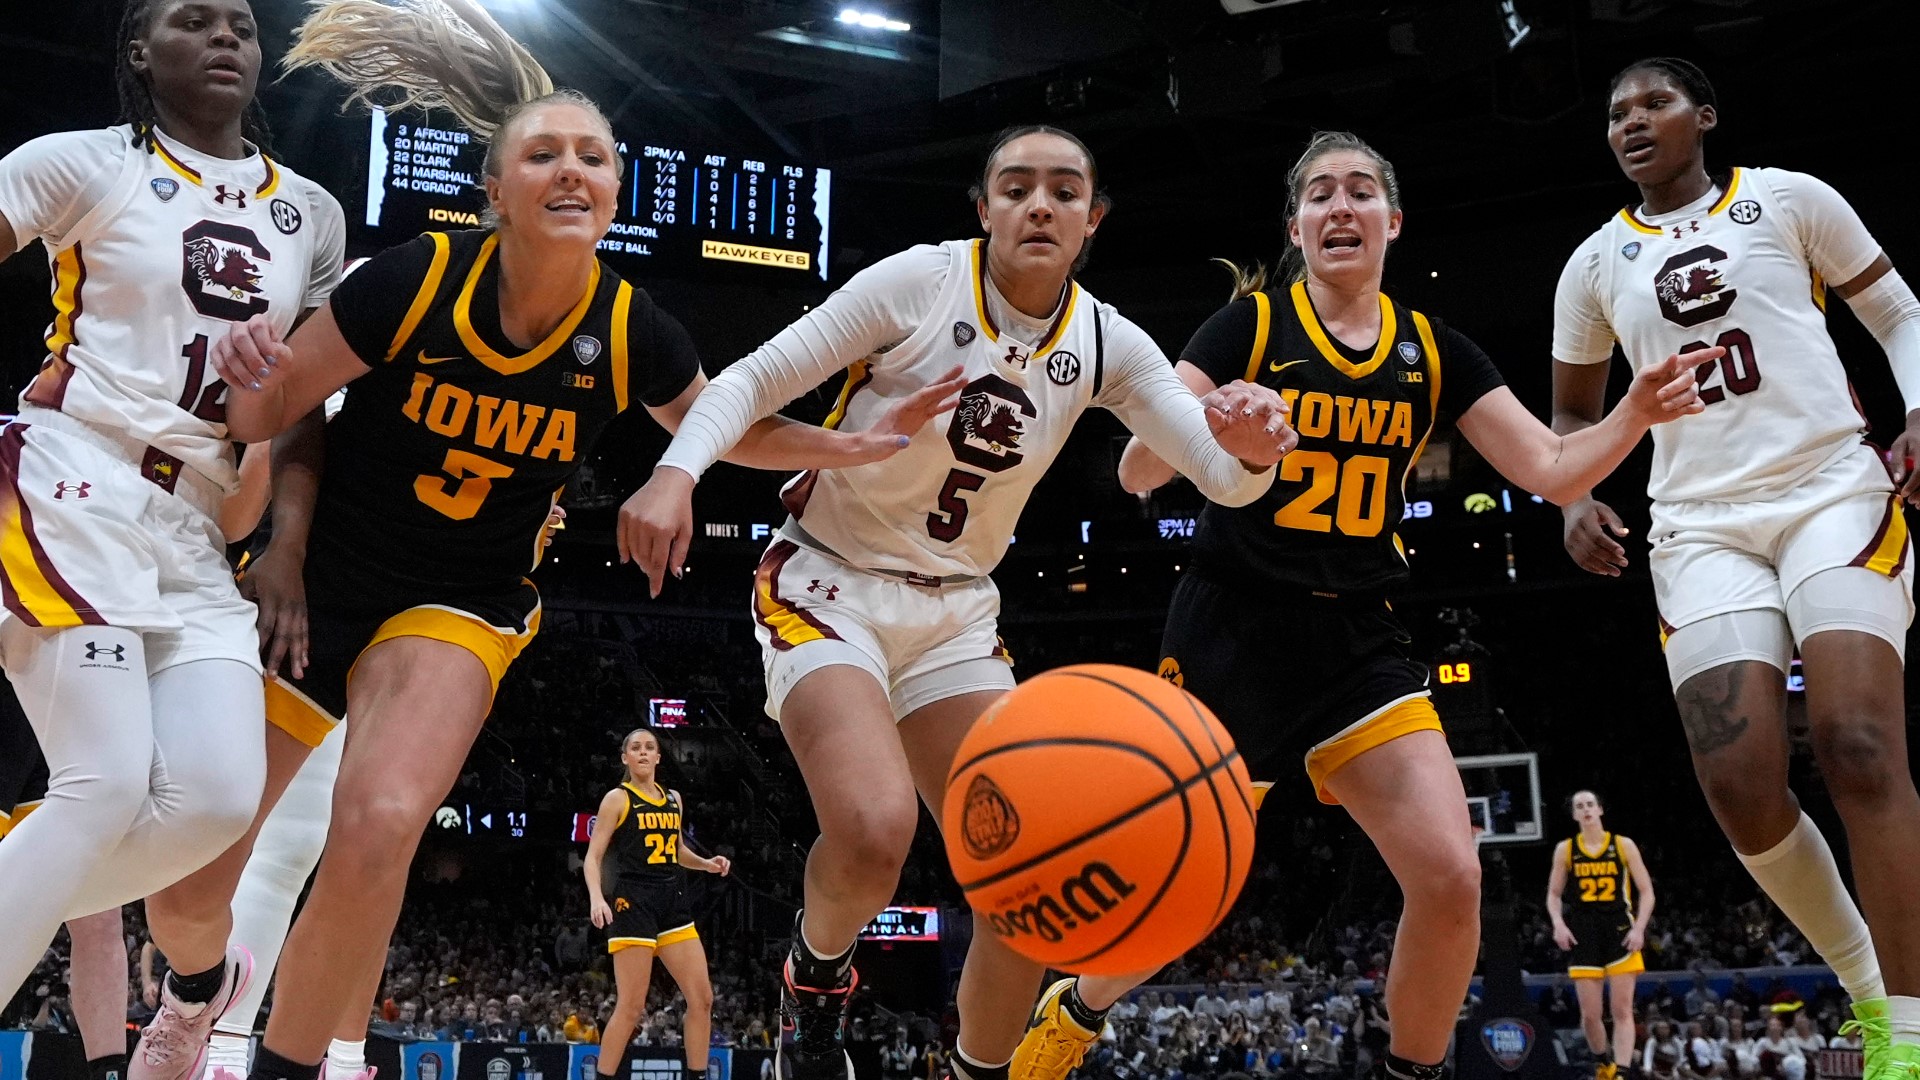 Dawn Staley and South Carolina completed their perfect season, ending Caitlin Clark’s historic college career with an 87-75 win over Iowa in the NCAA championship.